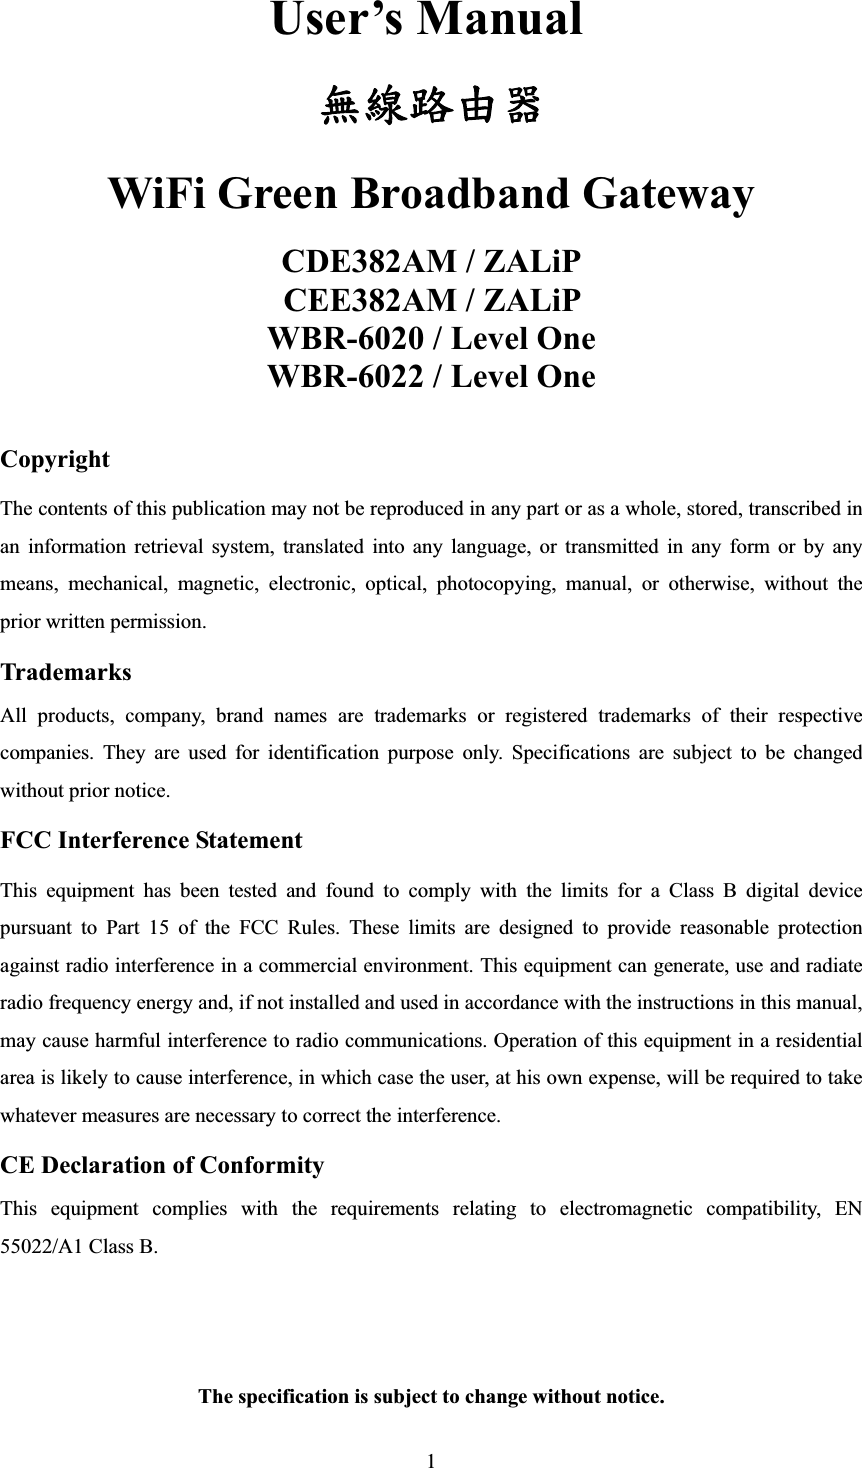 1User’s Manual คጕၡҗᏔWiFi Green Broadband Gateway CDE382AM / ZALiP CEE382AM / ZALiP   WBR-6020 / Level One WBR-6022 / Level One CopyrightThe contents of this publication may not be reproduced in any part or as a whole, stored, transcribed in an information retrieval system, translated into any language, or transmitted in any form or by any means, mechanical, magnetic, electronic, optical, photocopying, manual, or otherwise, without the prior written permission. Trademarks All products, company, brand names are trademarks or registered trademarks of their respective companies. They are used for identification purpose only. Specifications are subject to be changed without prior notice. FCC Interference Statement This equipment has been tested and found to comply with the limits for a Class B digital device pursuant to Part 15 of the FCC Rules. These limits are designed to provide reasonable protection against radio interference in a commercial environment. This equipment can generate, use and radiate radio frequency energy and, if not installed and used in accordance with the instructions in this manual, may cause harmful interference to radio communications. Operation of this equipment in a residential area is likely to cause interference, in which case the user, at his own expense, will be required to take whatever measures are necessary to correct the interference. CE Declaration of Conformity This equipment complies with the requirements relating to electromagnetic compatibility, EN 55022/A1 Class B. The specification is subject to change without notice.